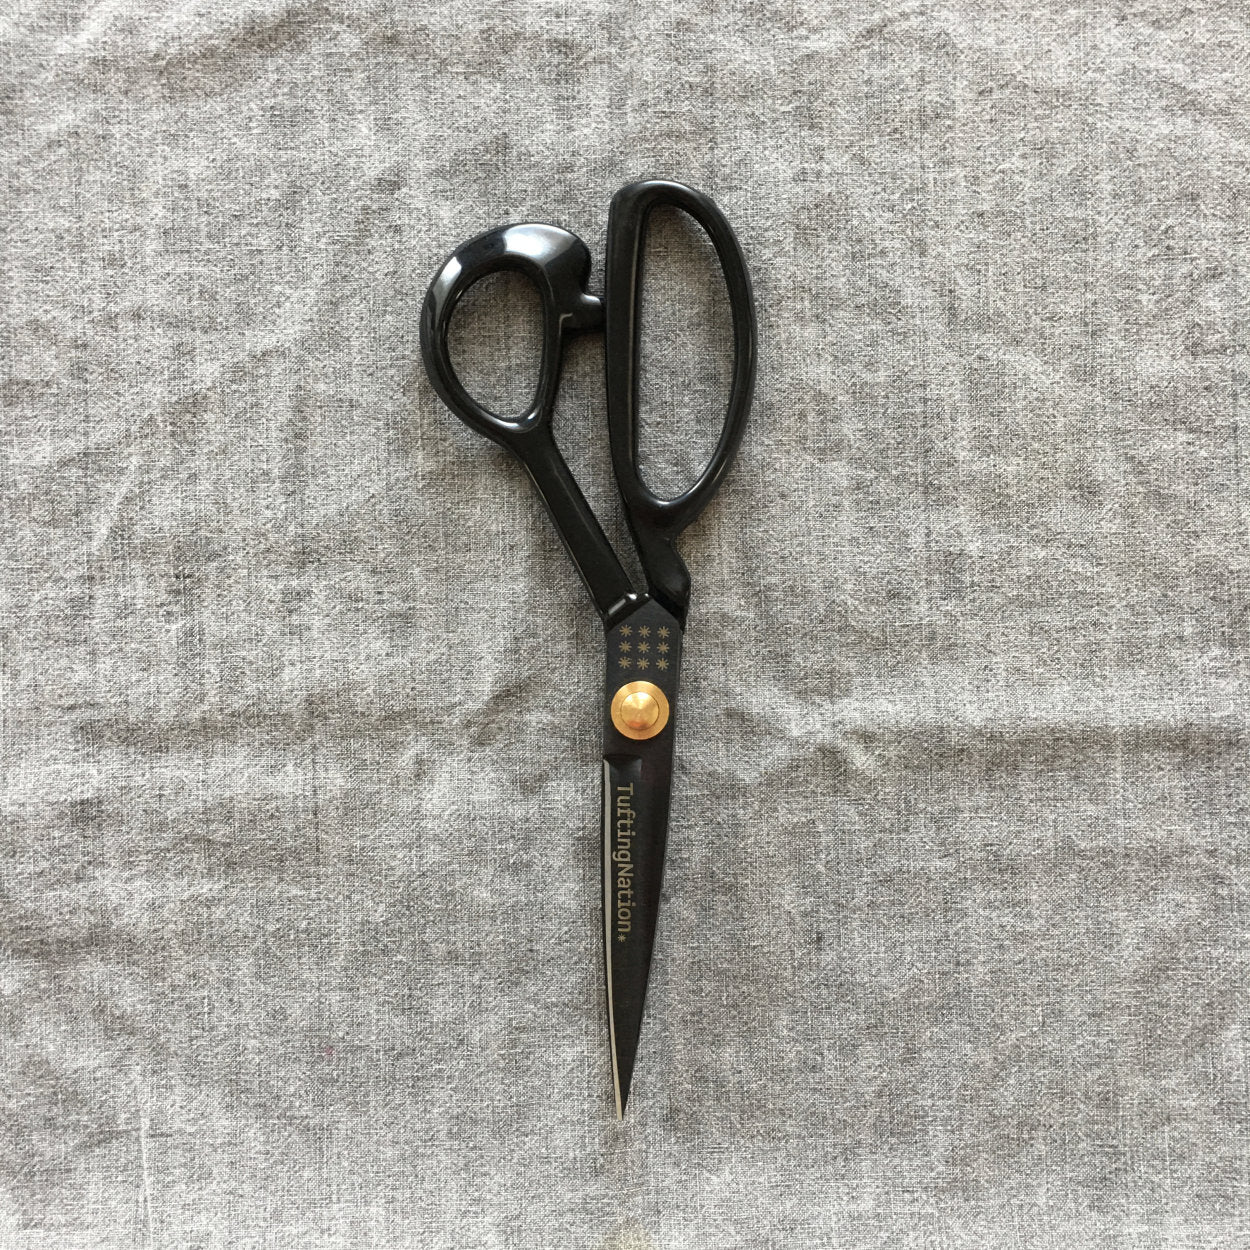 Tailor Shears for Fabric and Rug Making | TuftingNation.com